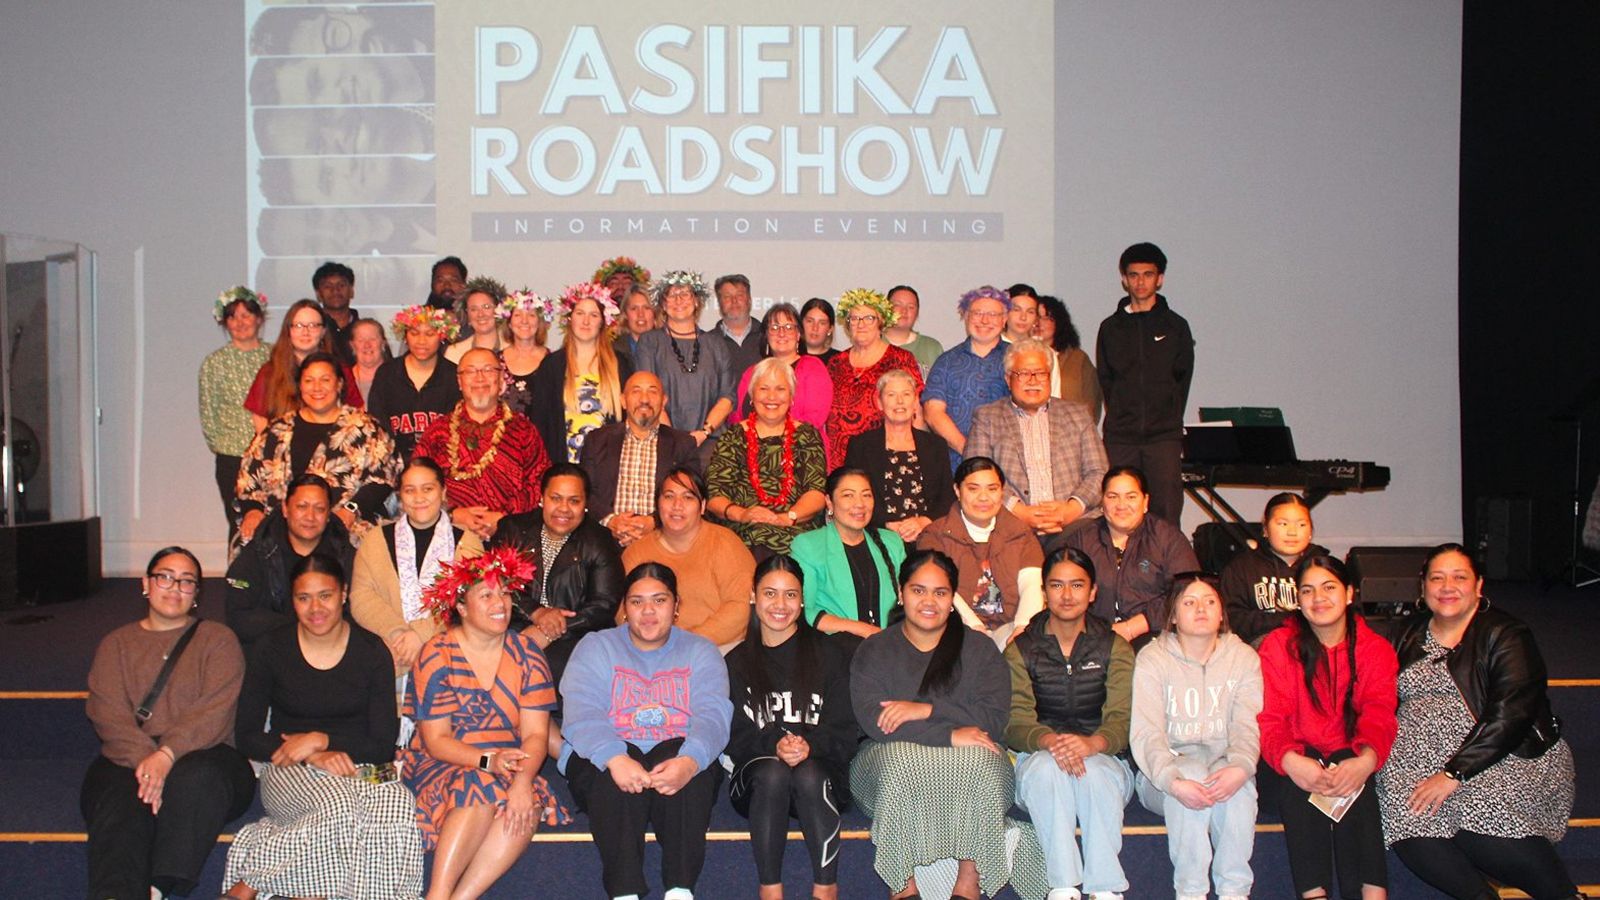 A large group of people in a room sitting in rows with a sign for the Pasifika Roadshow behind them.